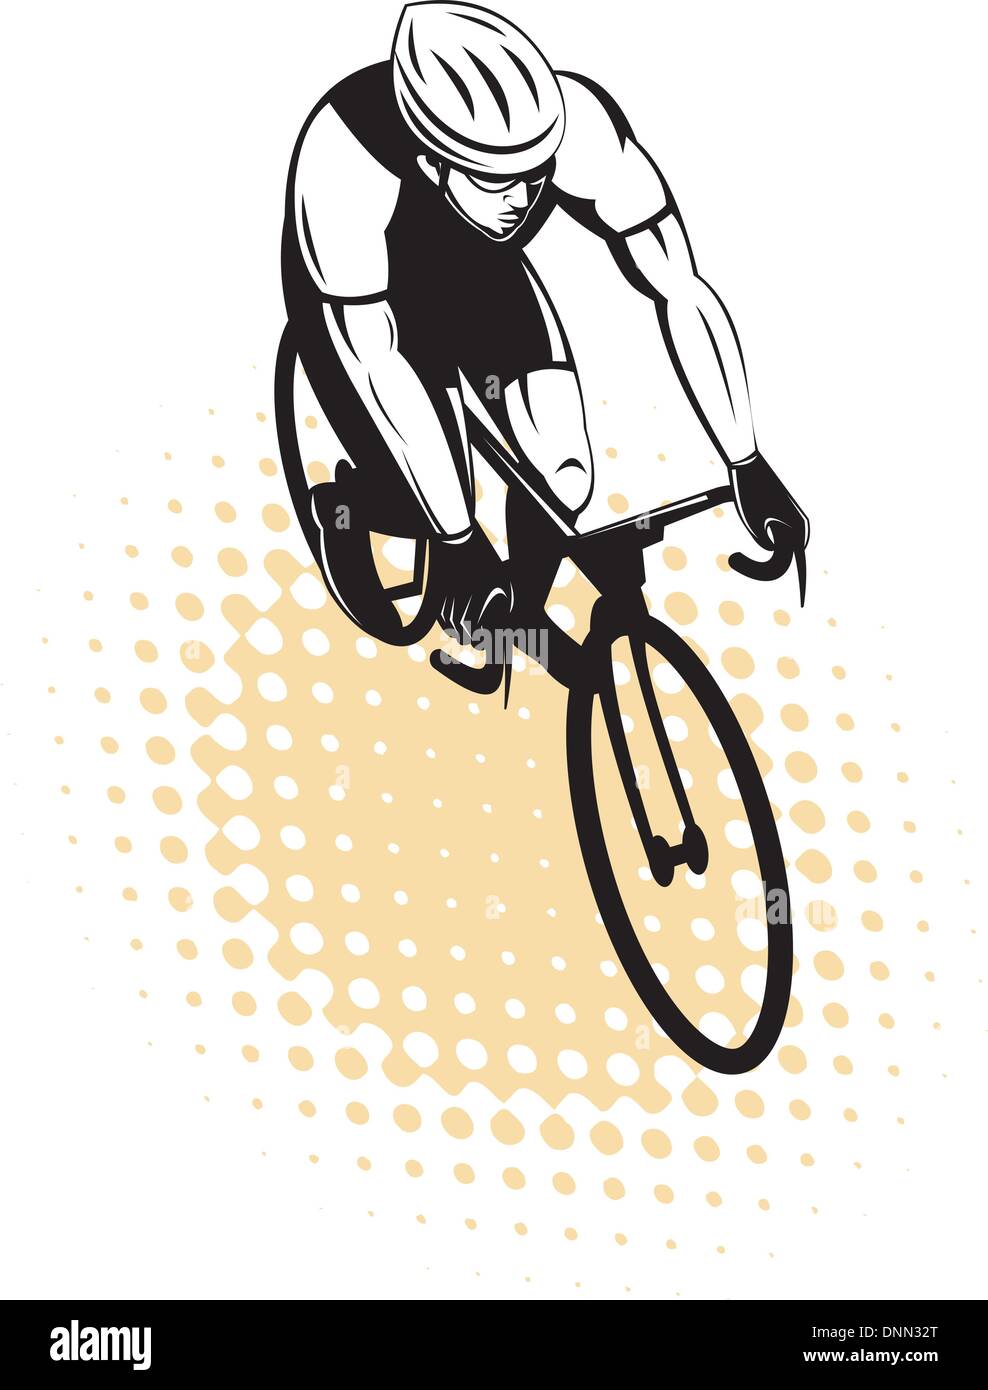 Illustration of a male cyclist riding racing bicycle viewed from high angle done in retro style. Stock Vector